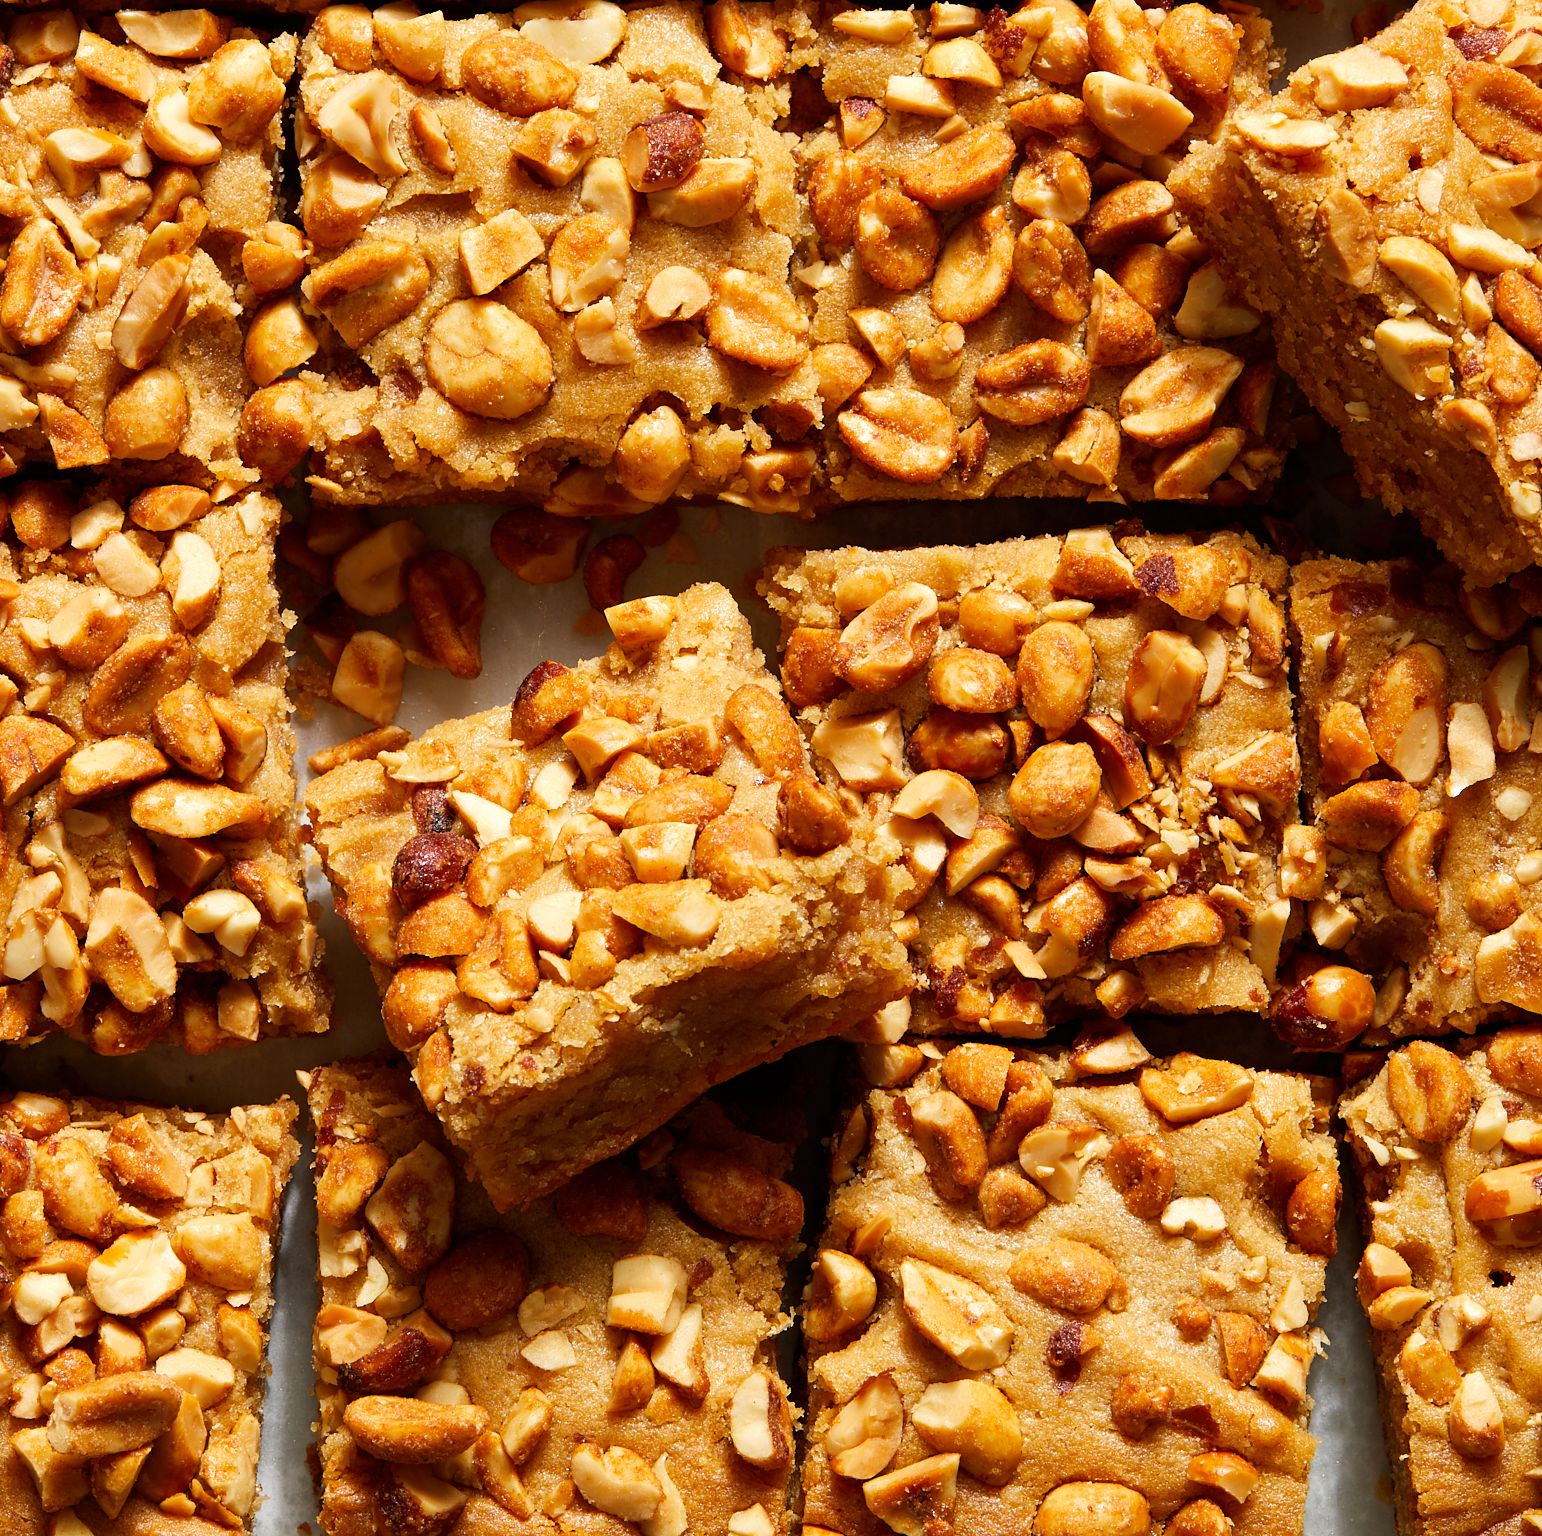 Relive Your Childhood With Our Honey & Peanut Butter Blondies